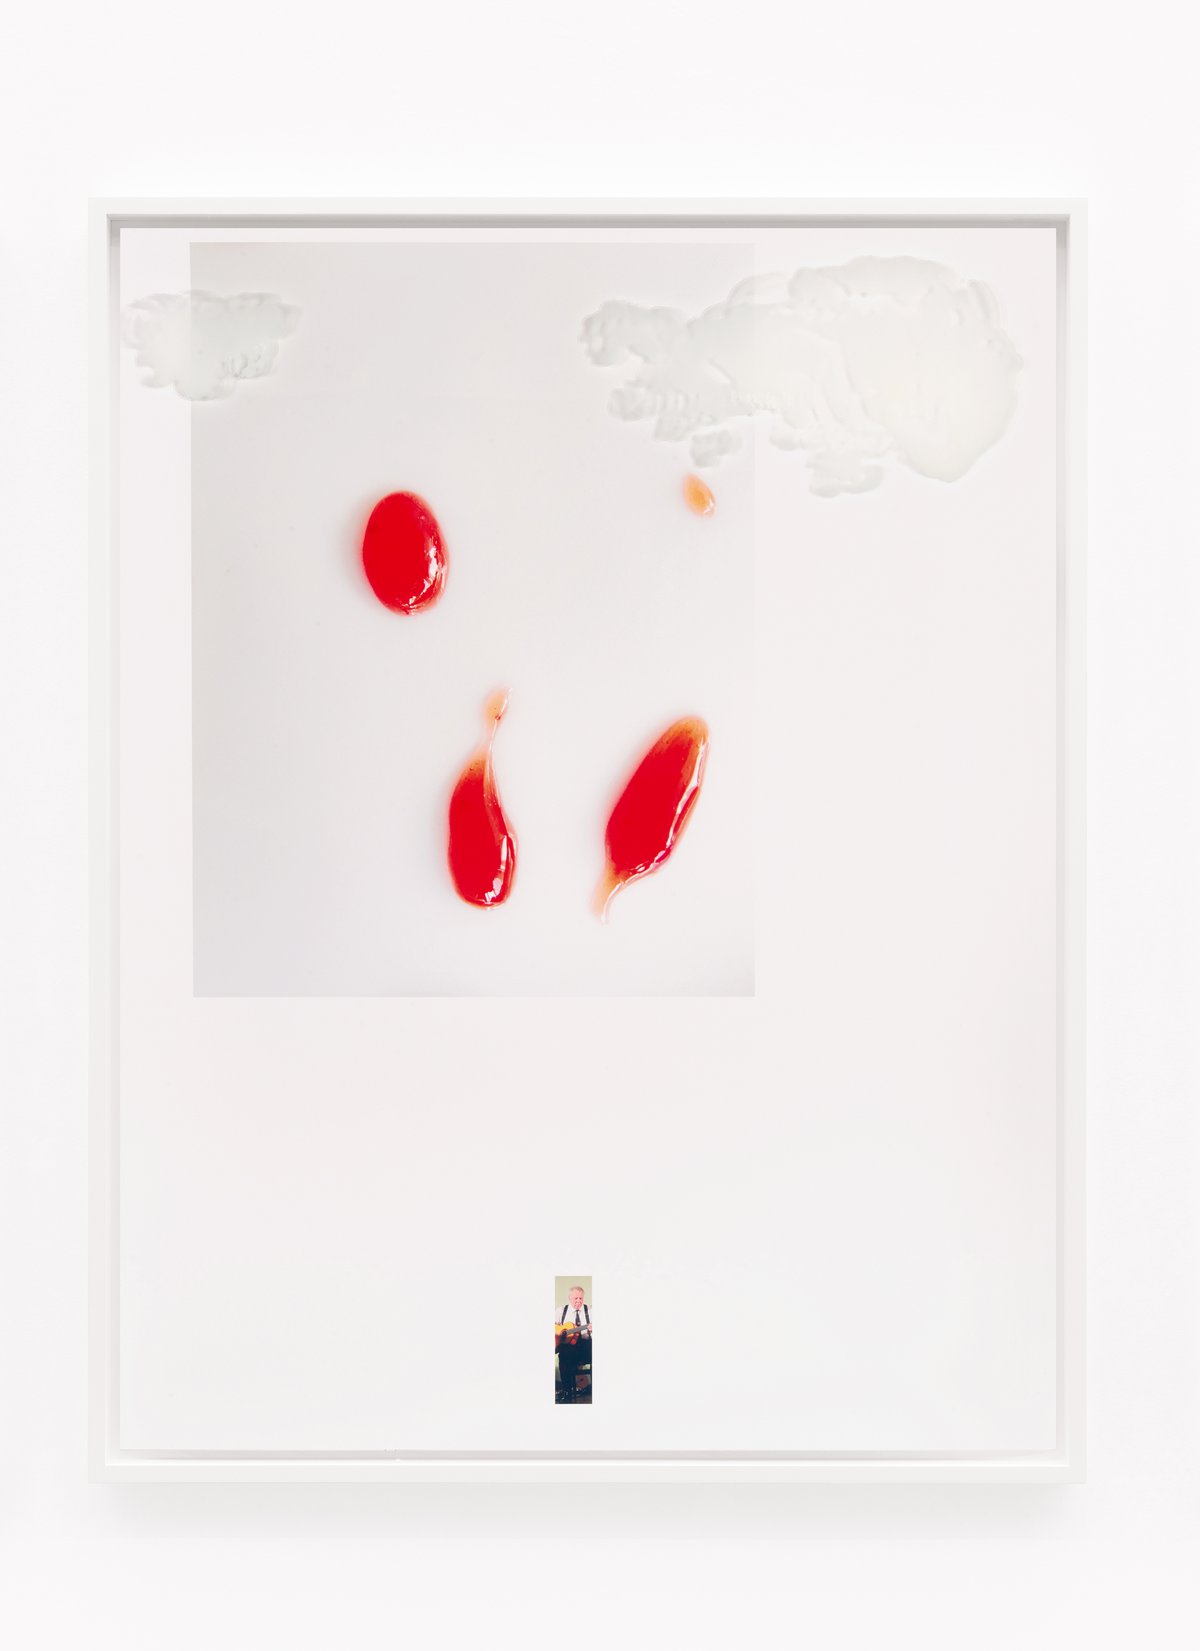 Lisa HolzerMayo passing under strawberry jam stains, 2013Acrylic on glass, pigment print on cotton paper92 × 72 cmEdition of 1 plus 1 artist’s proof